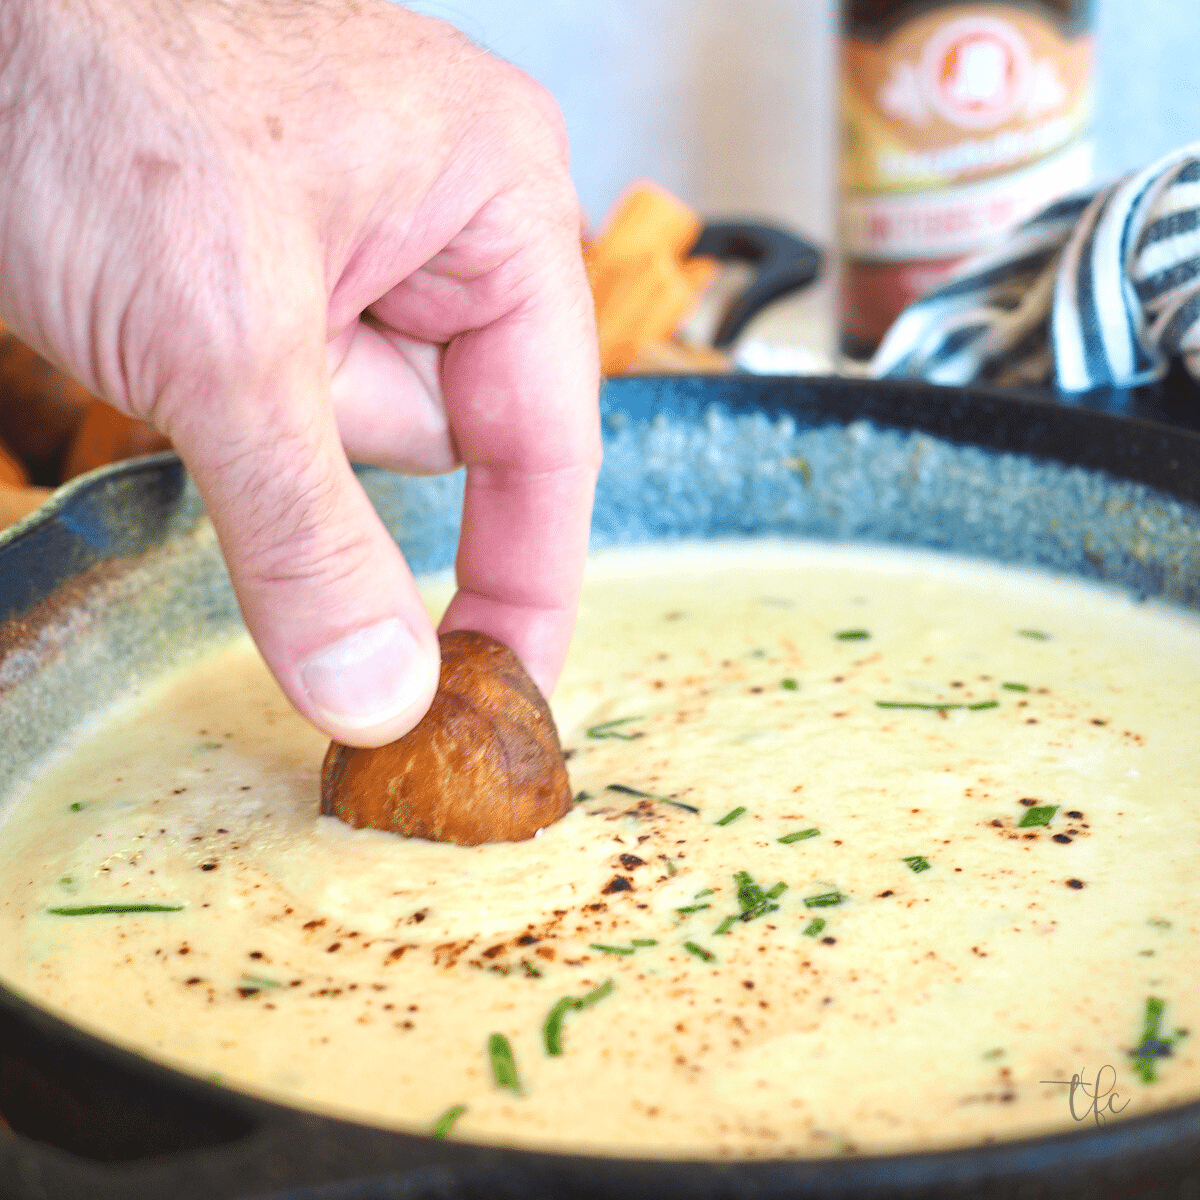 Easy Beer Cheese Dip with hand holding pretzel bite dipping into hot melty cheese dip.